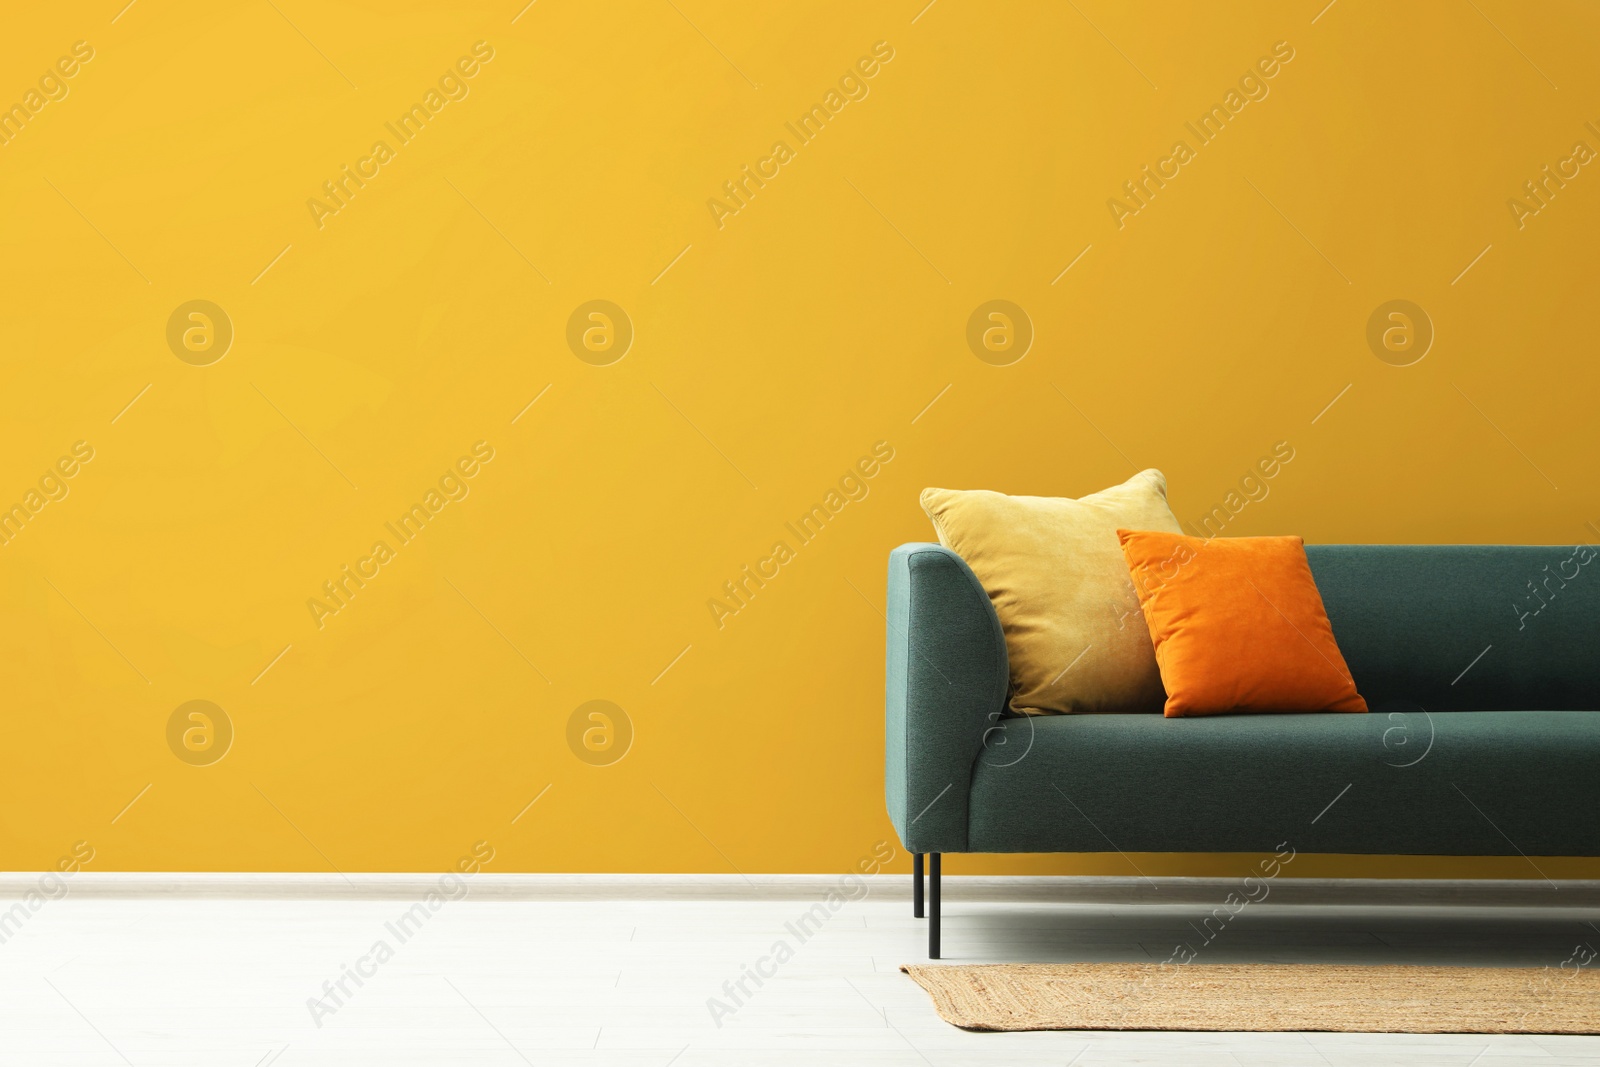 Photo of Stylish sofa with cushions and rug near orange wall indoors, space for text. Interior design